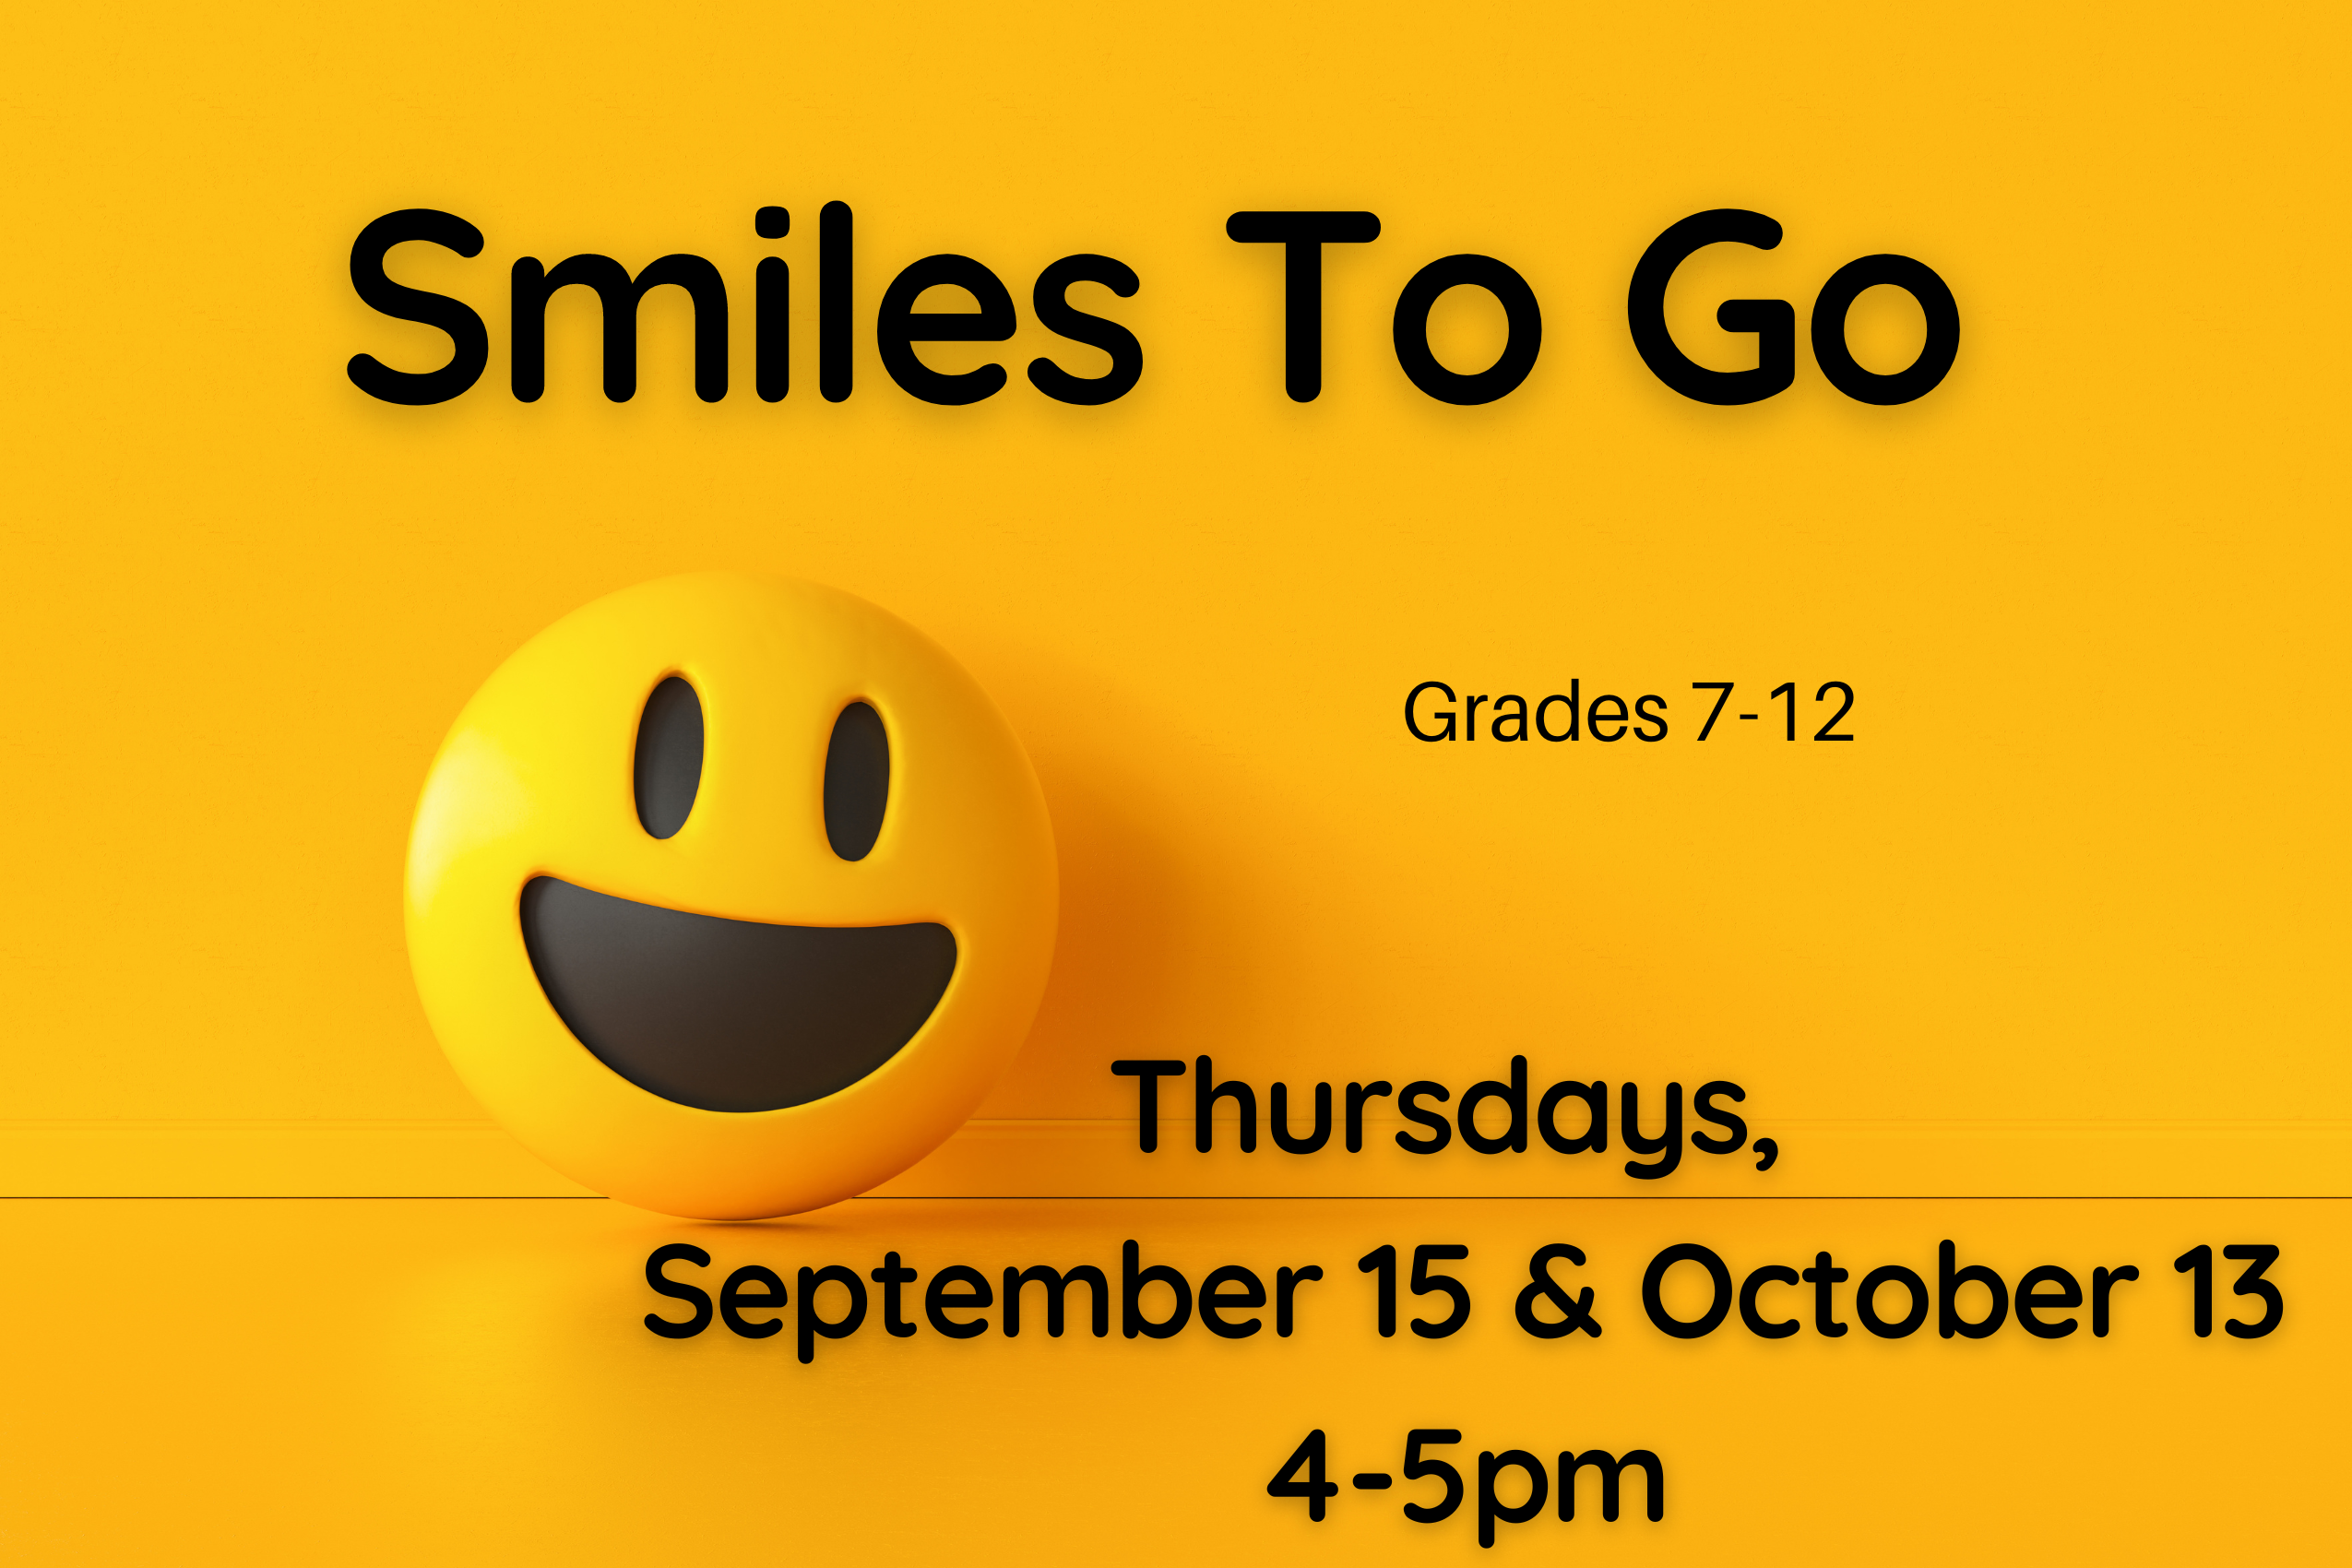 Program flyer with the following text, "Smiles to Go. Grades 7-12. Thursdays, September 15 & October 13. 4:00-5:00pm."